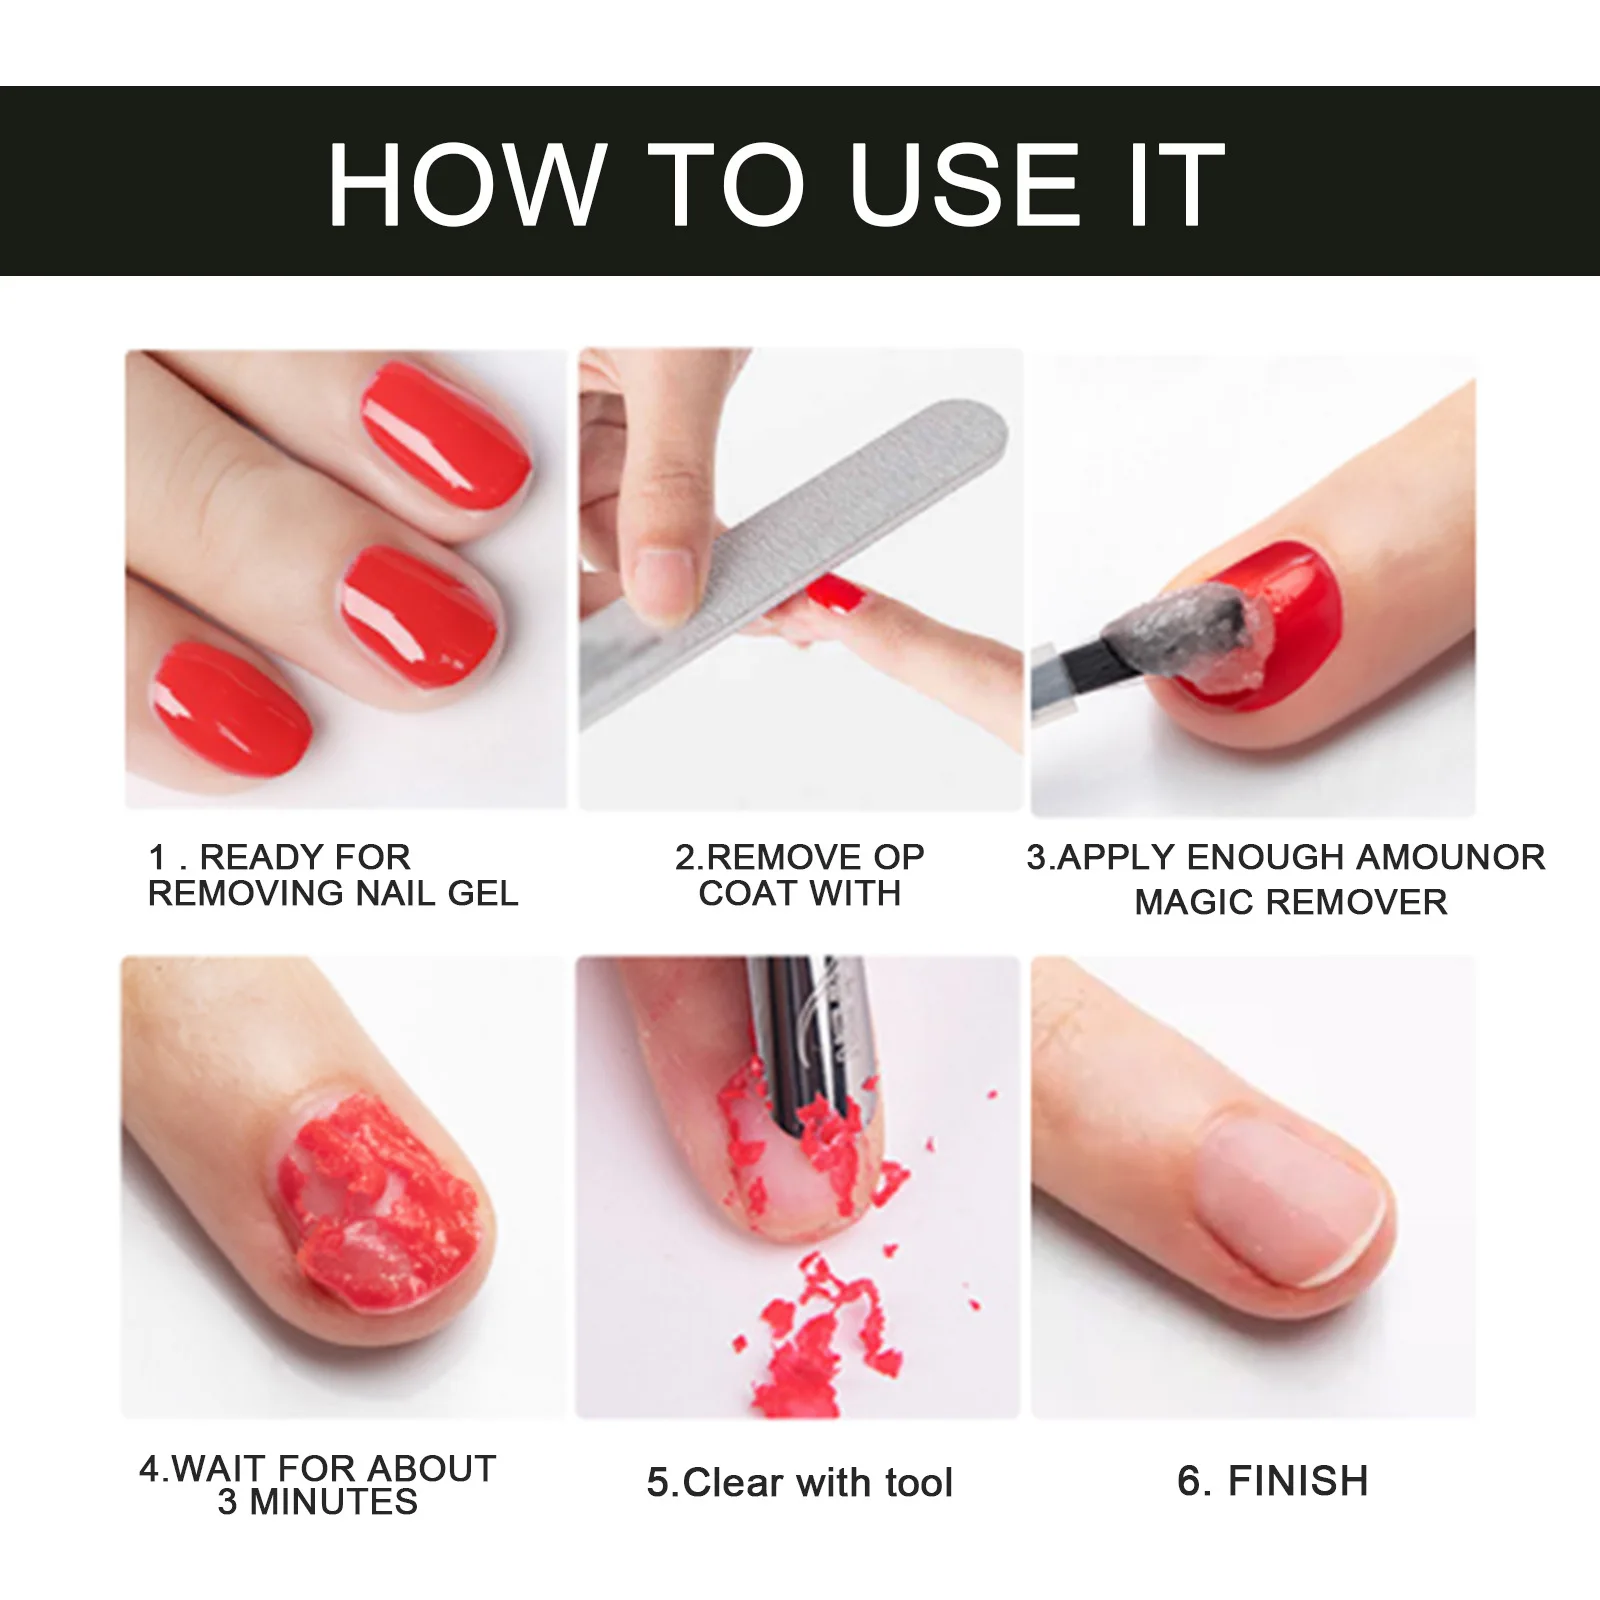 how to remove gel nail polish at home - nail care - essie uk